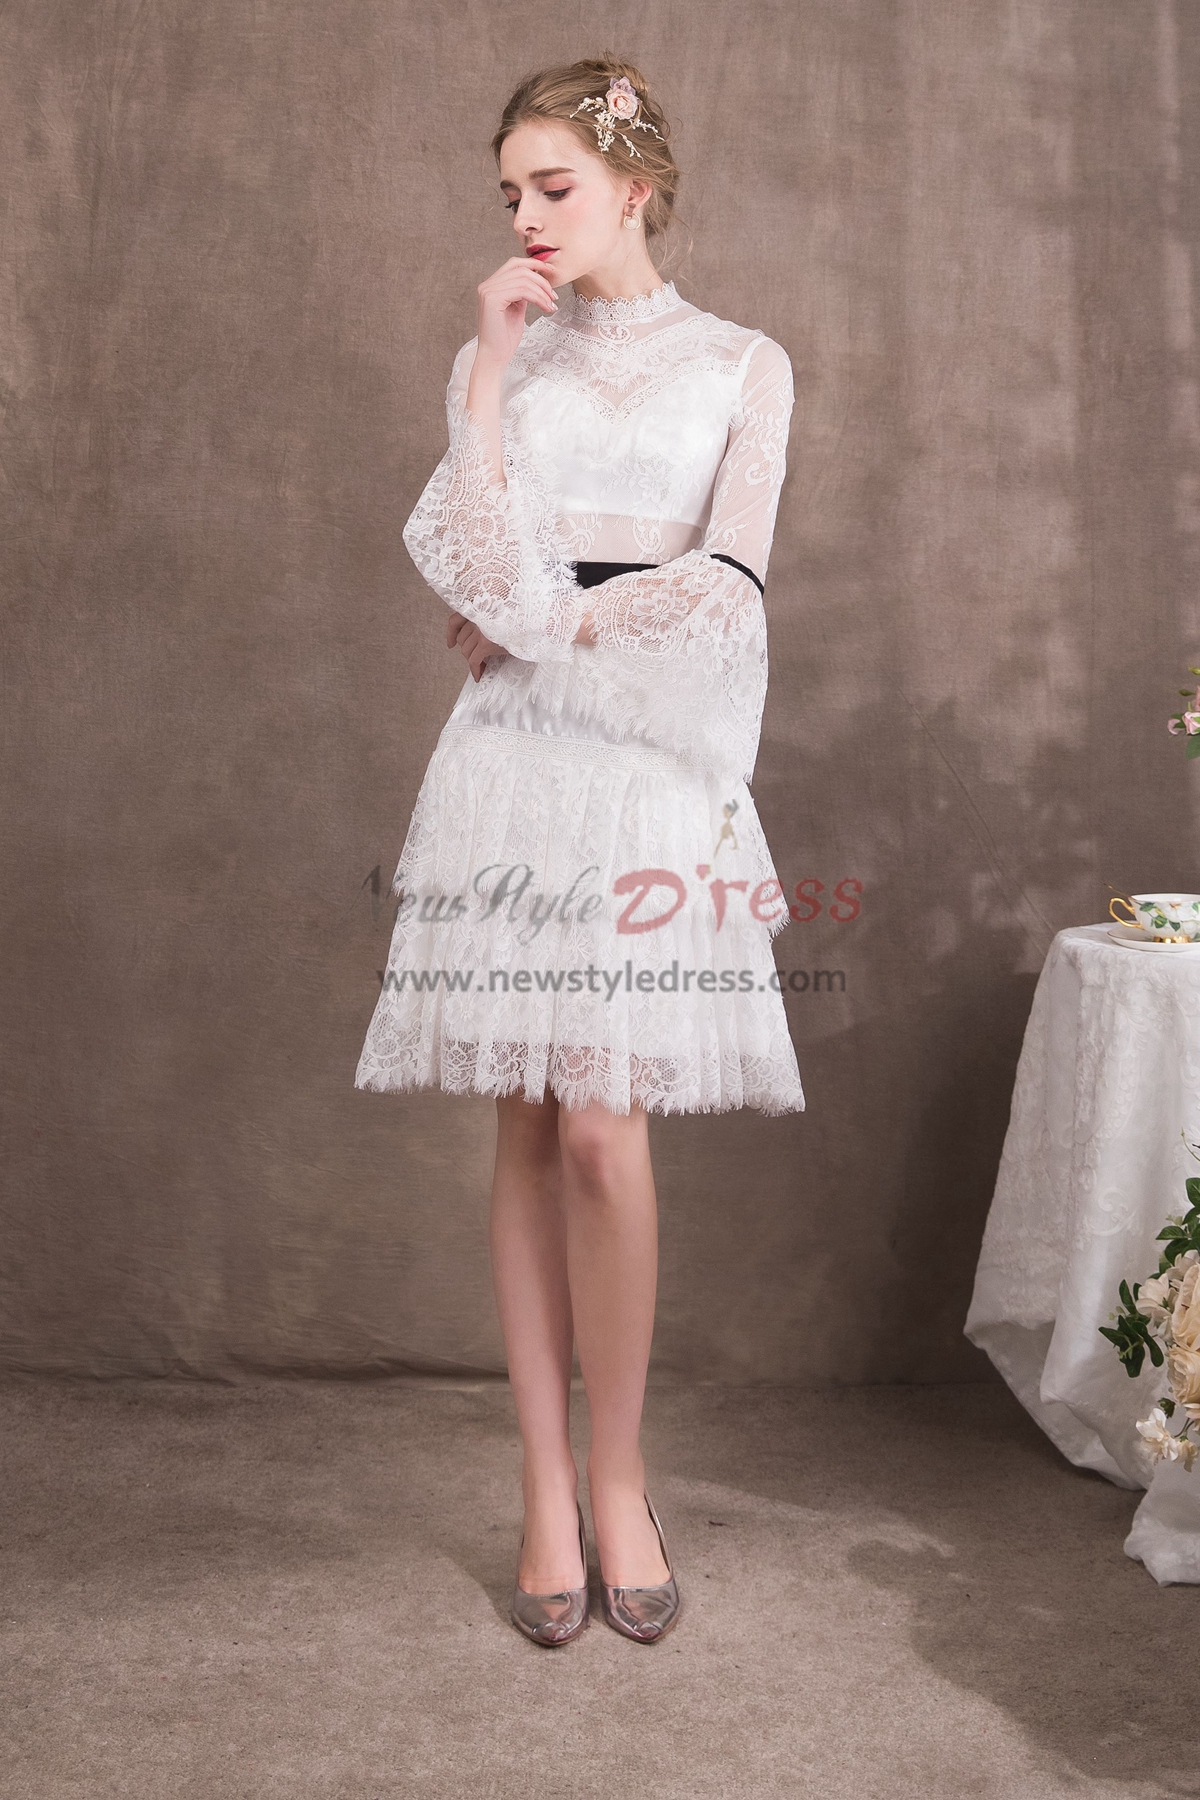 White Lace Knee-Length Prom dresses with Long Sleeves NP-0421